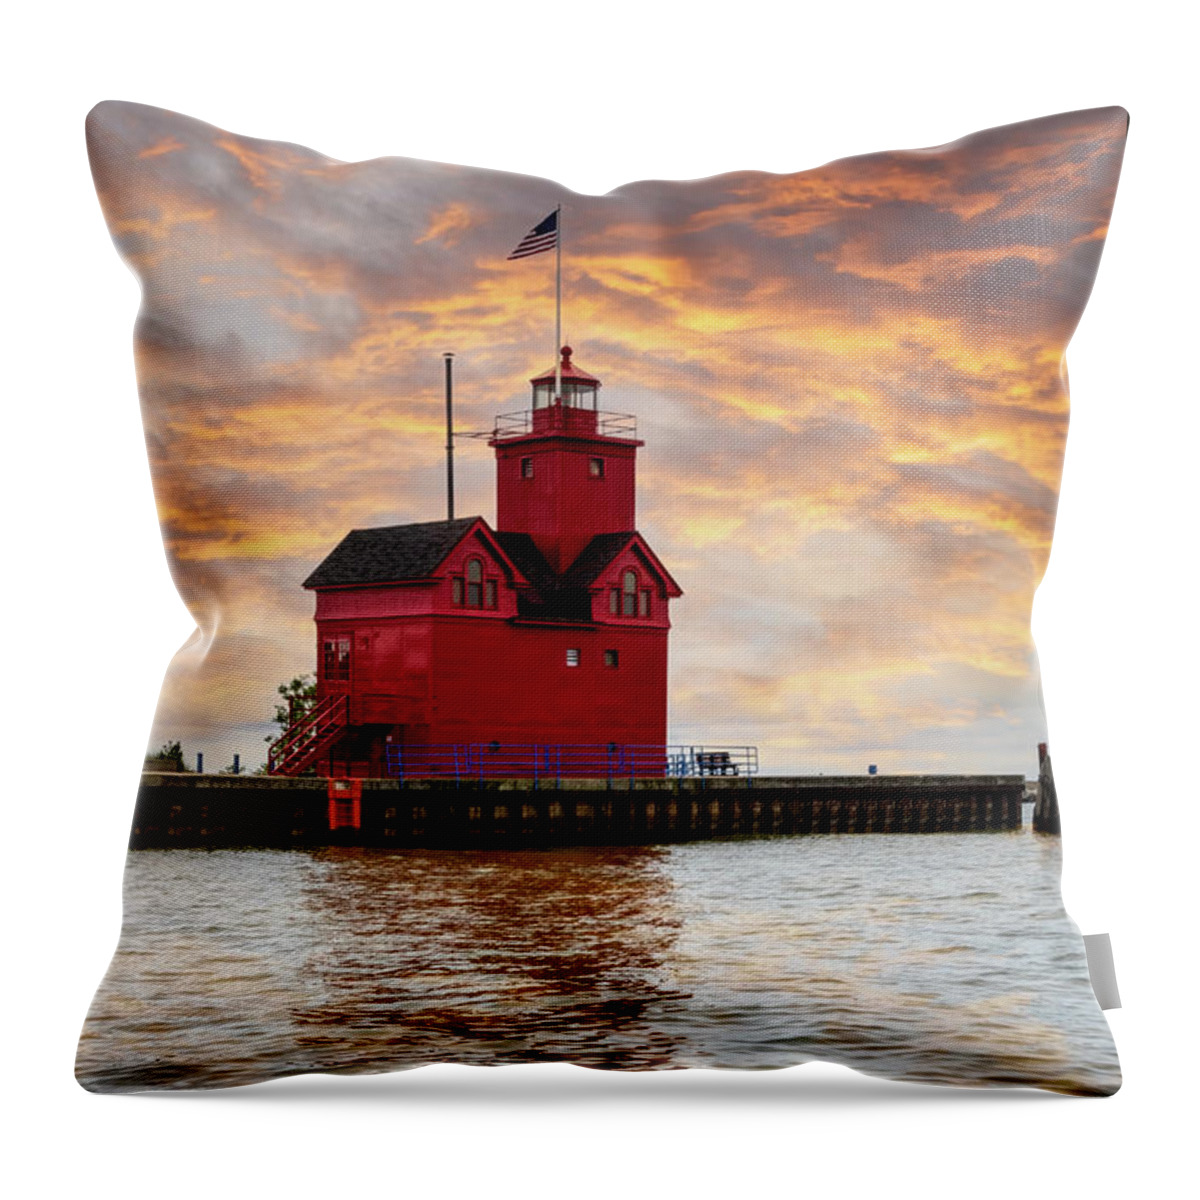 Lighthouse Throw Pillow featuring the photograph The Holland Harbor Lighthouse by Debra and Dave Vanderlaan